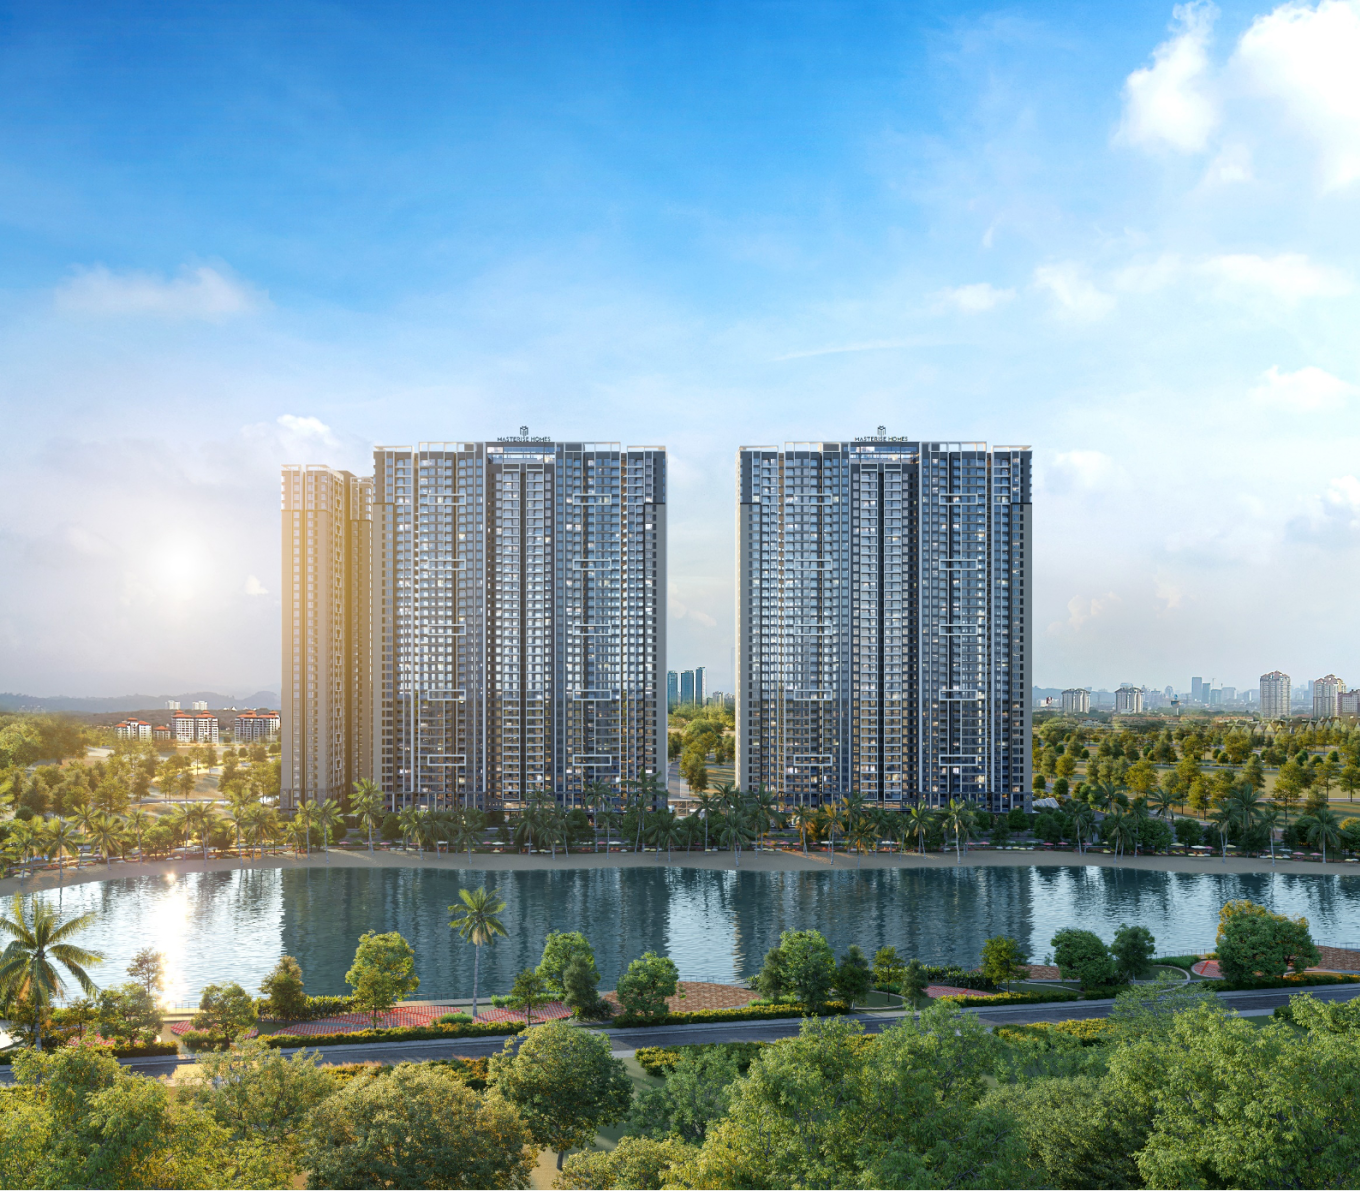 mua-can-ho-masteri-west-heights-nen-chon-hinh-thuc-thanh-toan-the-nao-onehousing-2